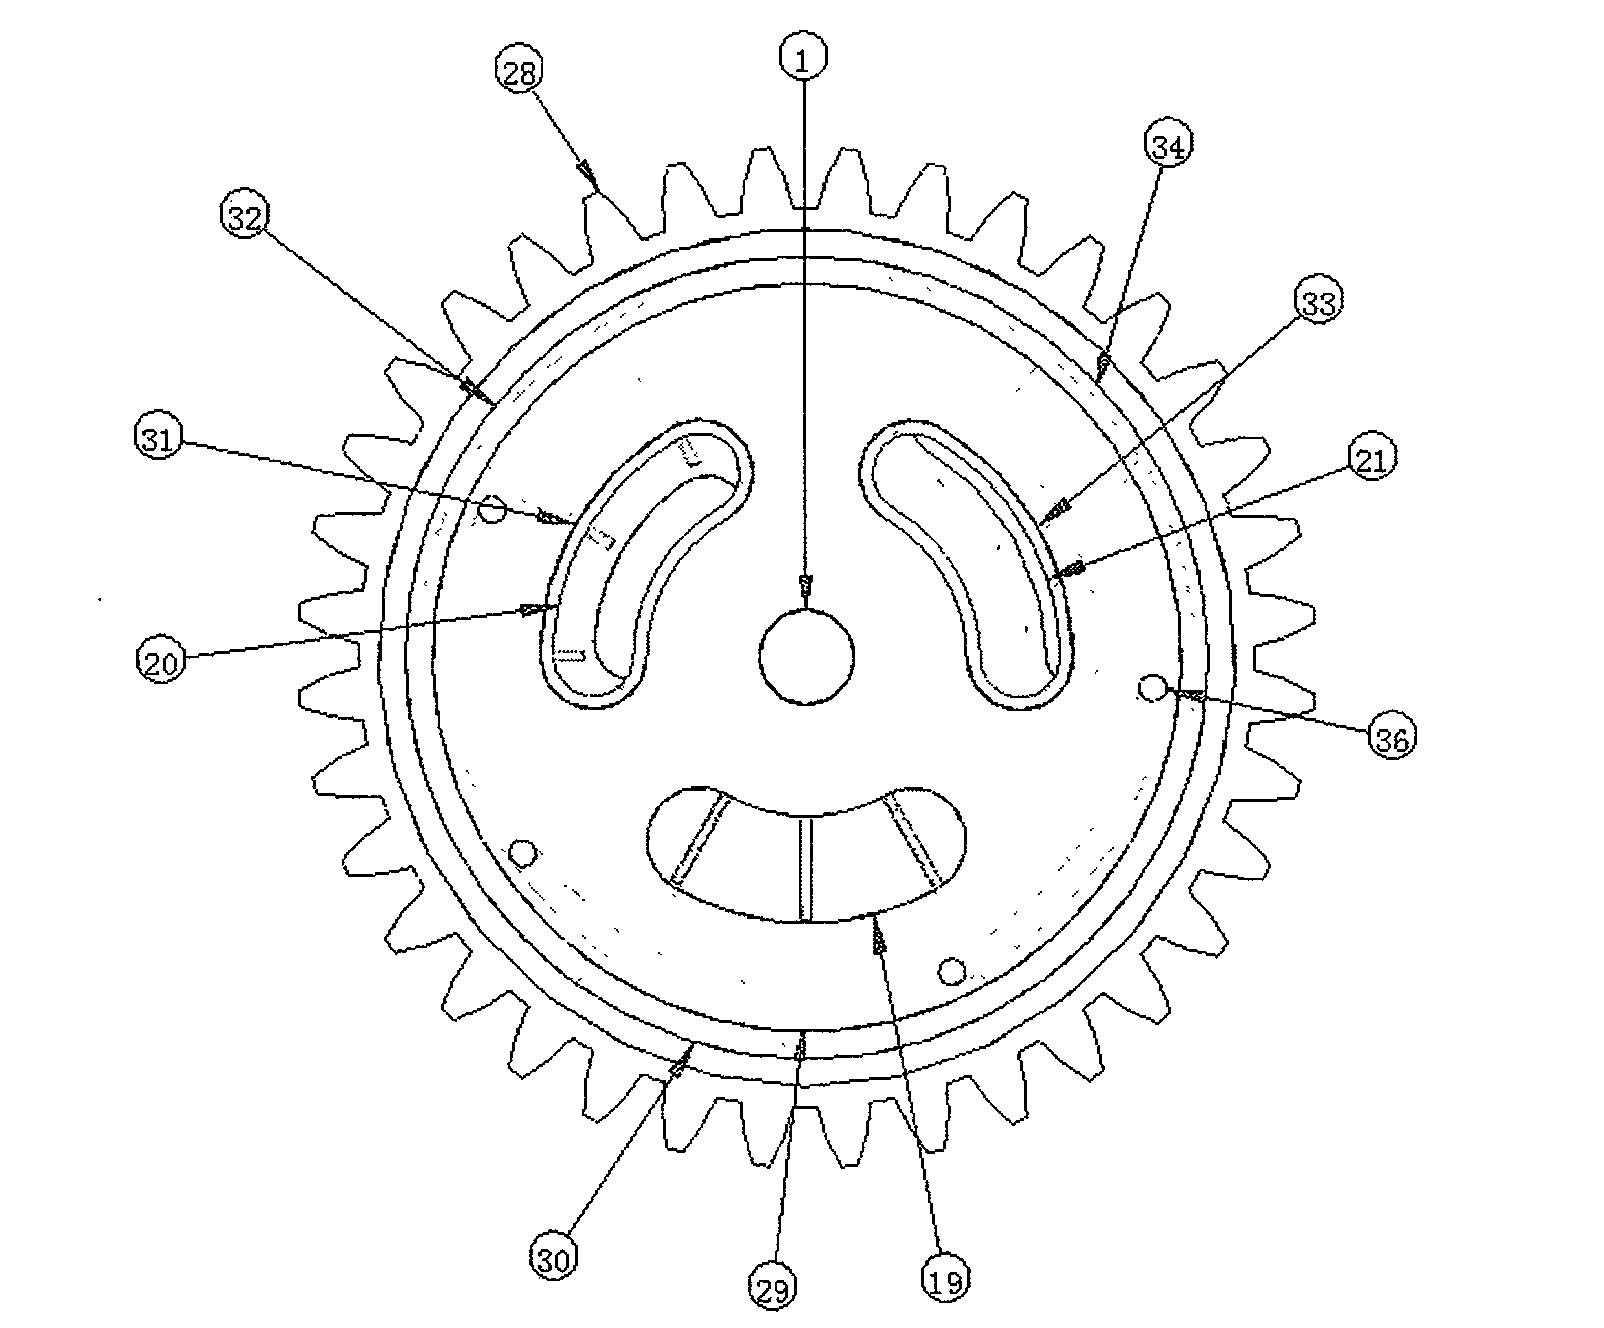 Hydraulic transformer with safety device